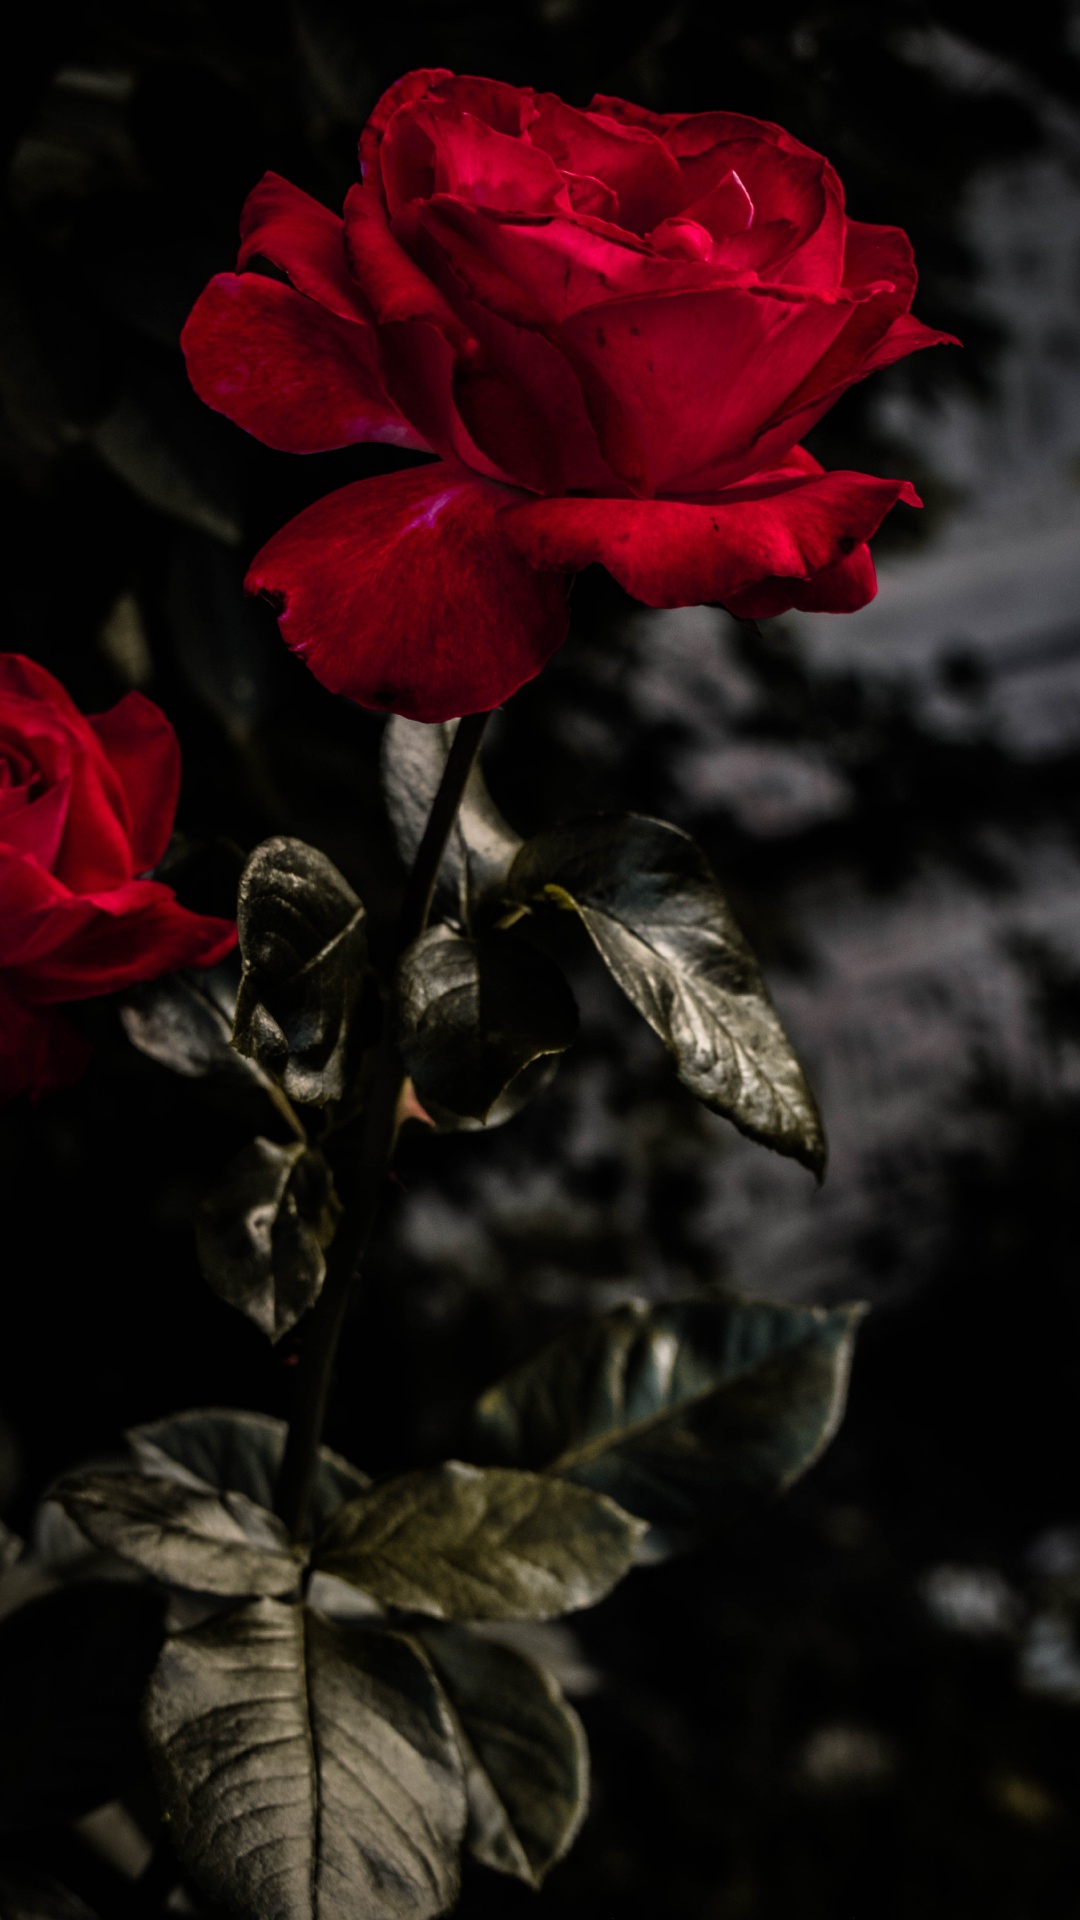 Red Rose in Bloom During Daytime. Wallpaper in 1080x1920 Resolution